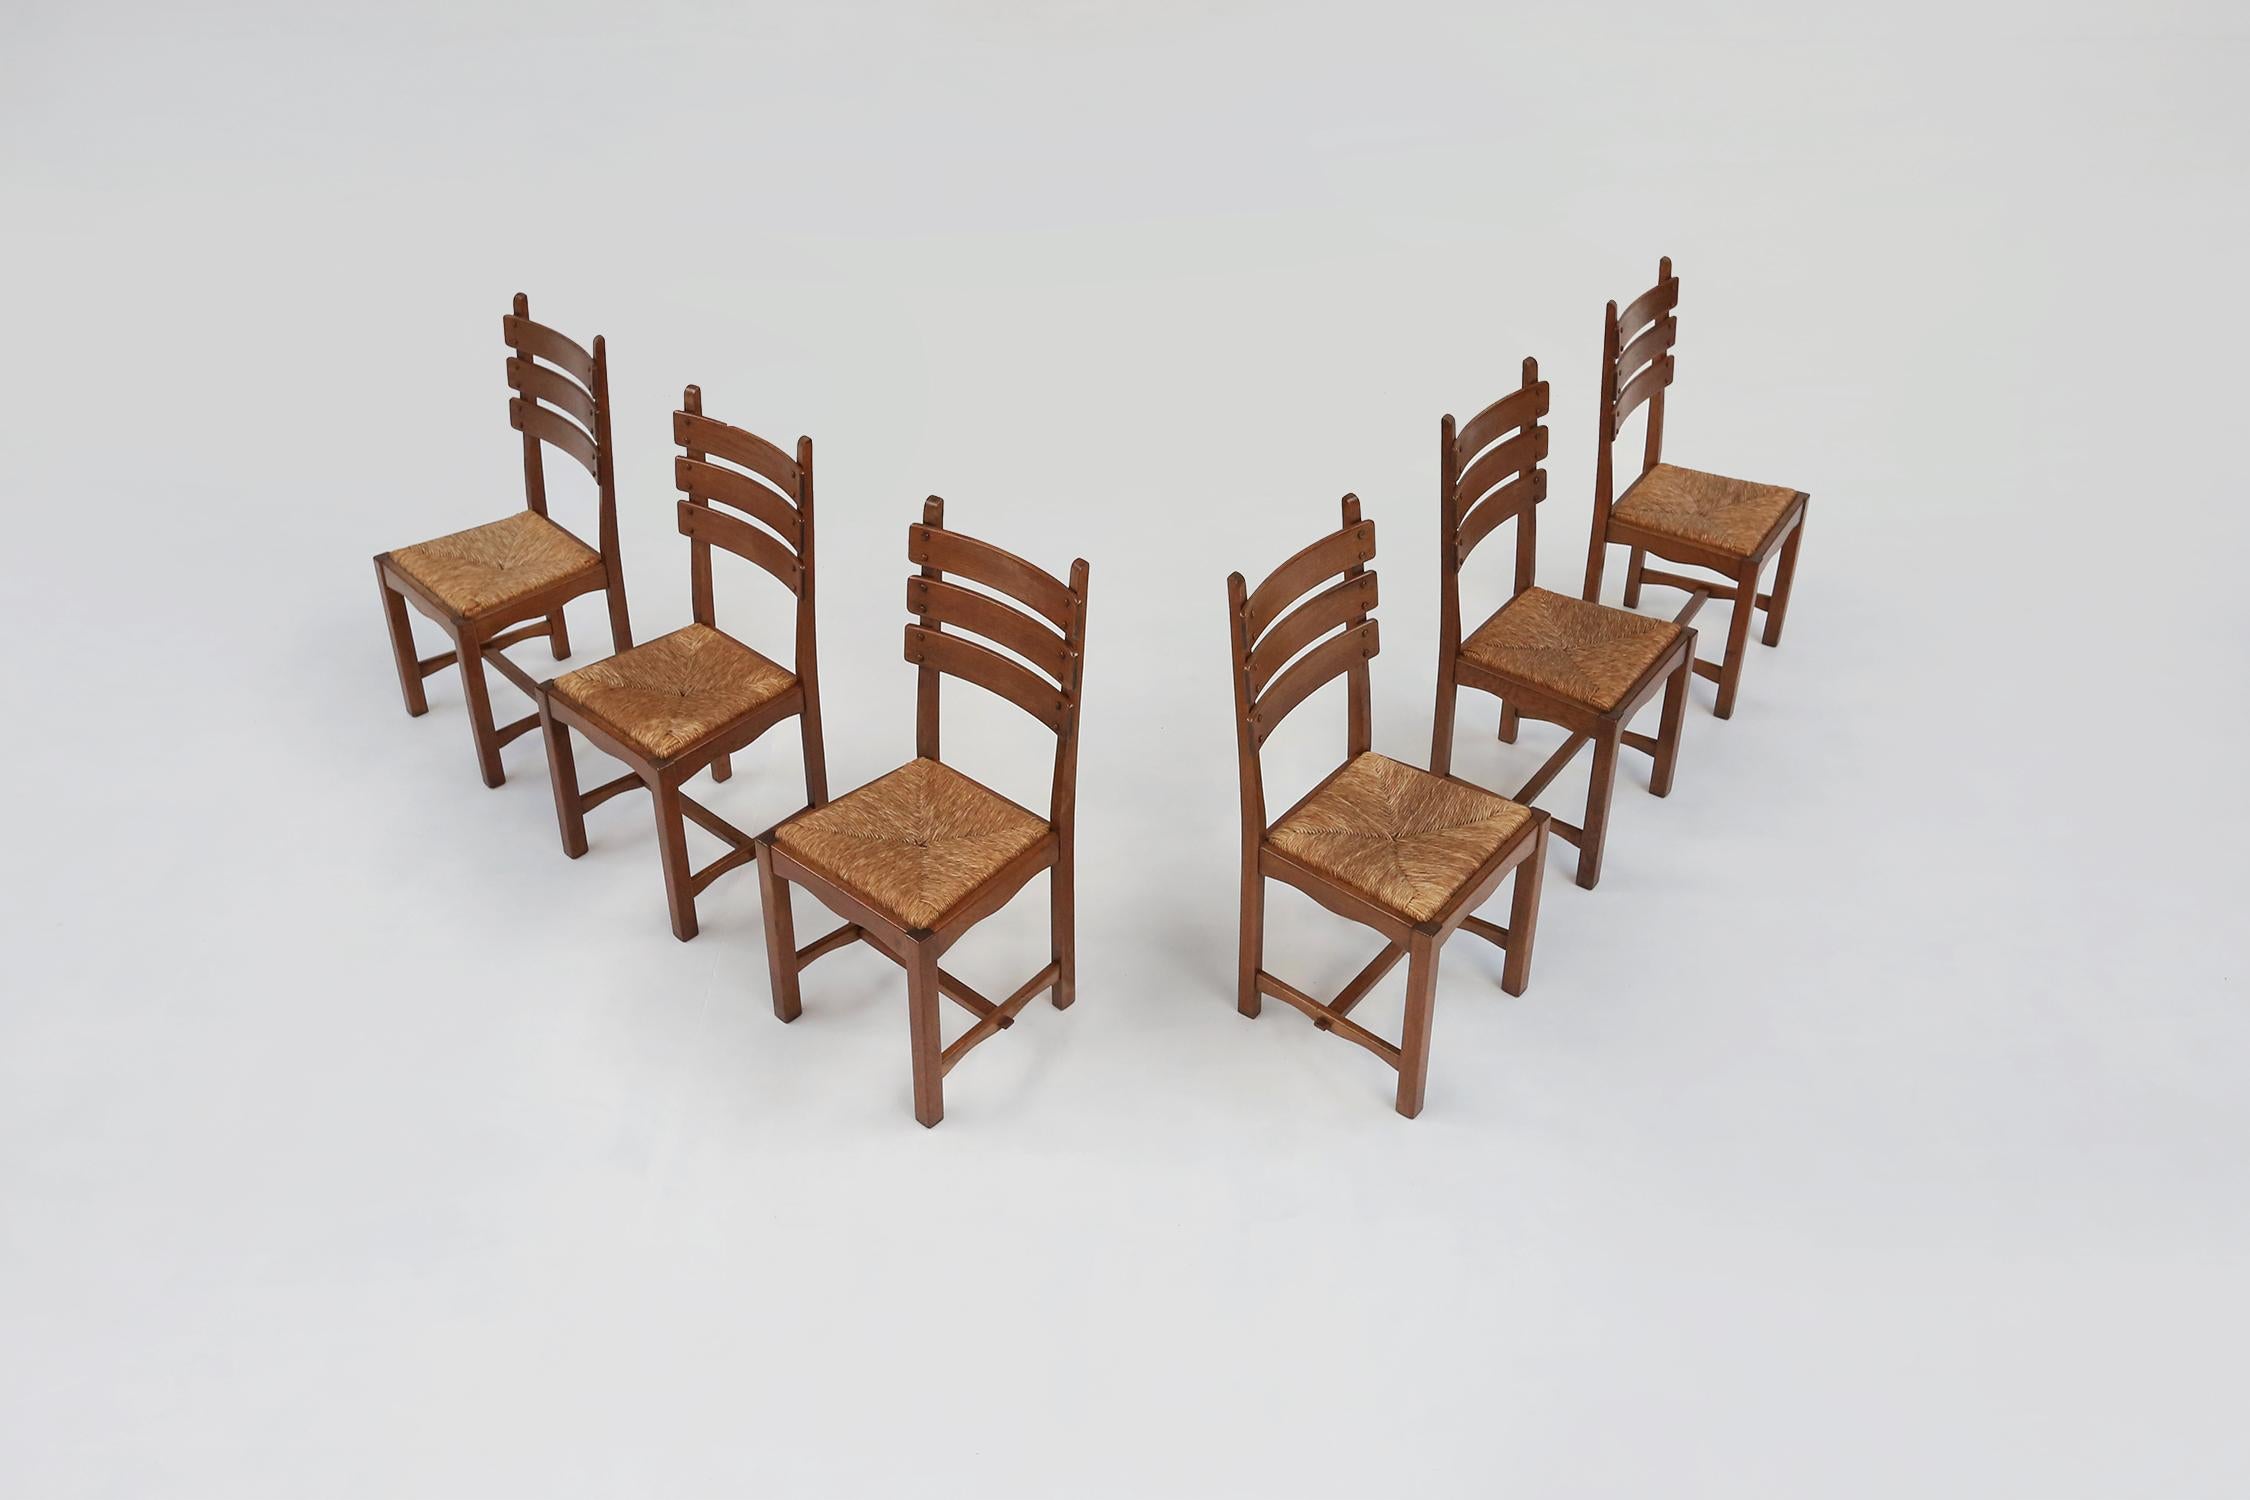 Impressive set of Belgian brutalist dining chairs. Made of a solid oak base and a seat of rush straw. With some nice details in the wood joints of the backrest.